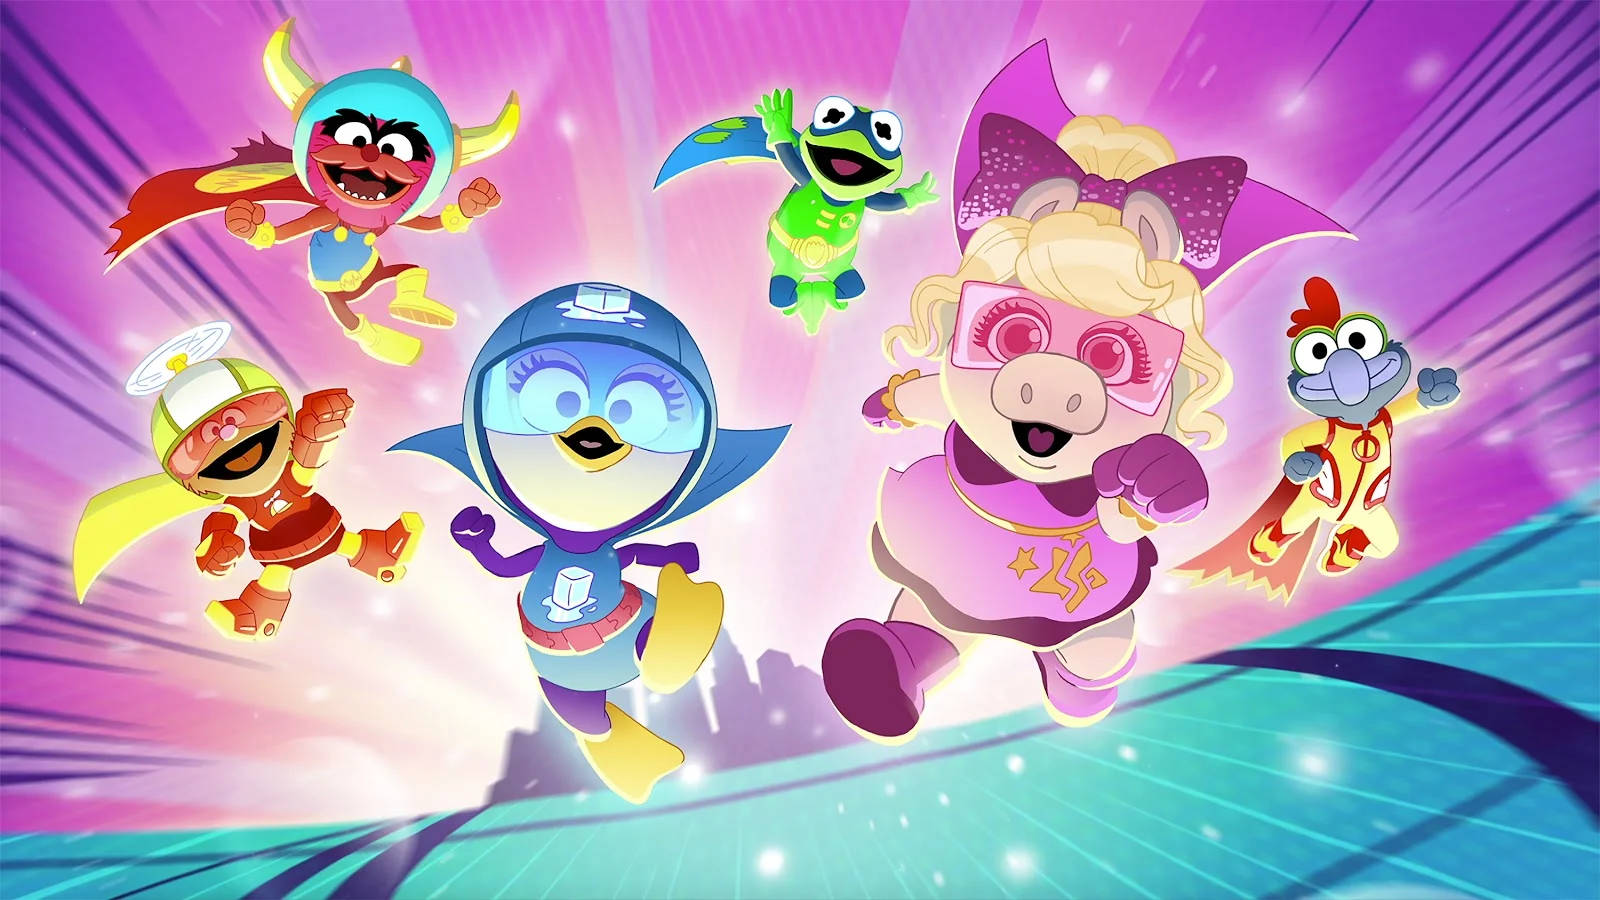 Adorable Muppet Babies Dressed As Superheroes Background